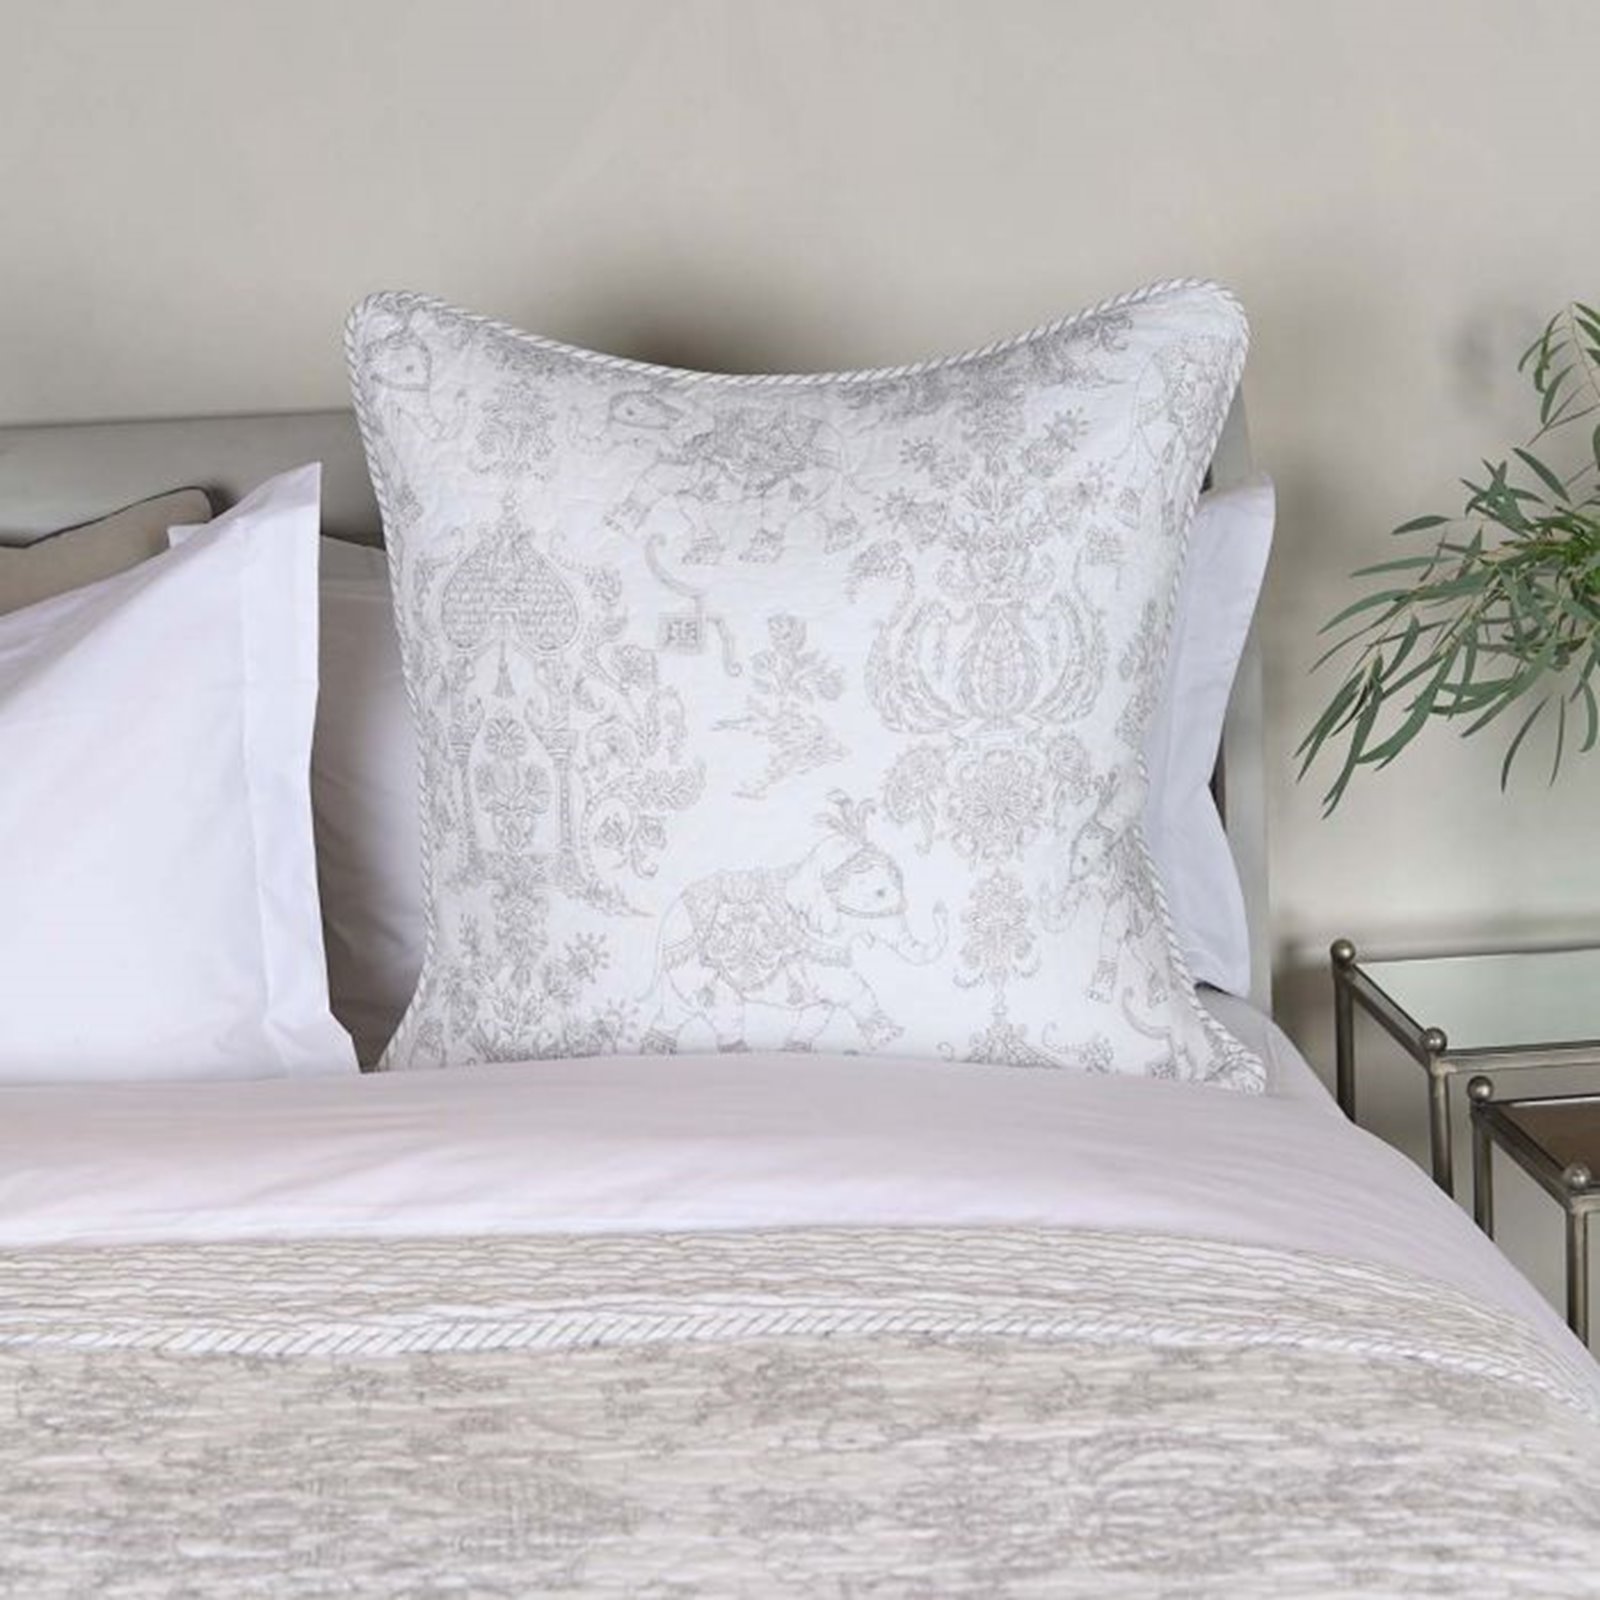 Grey and White Toile Bed Cushion Image